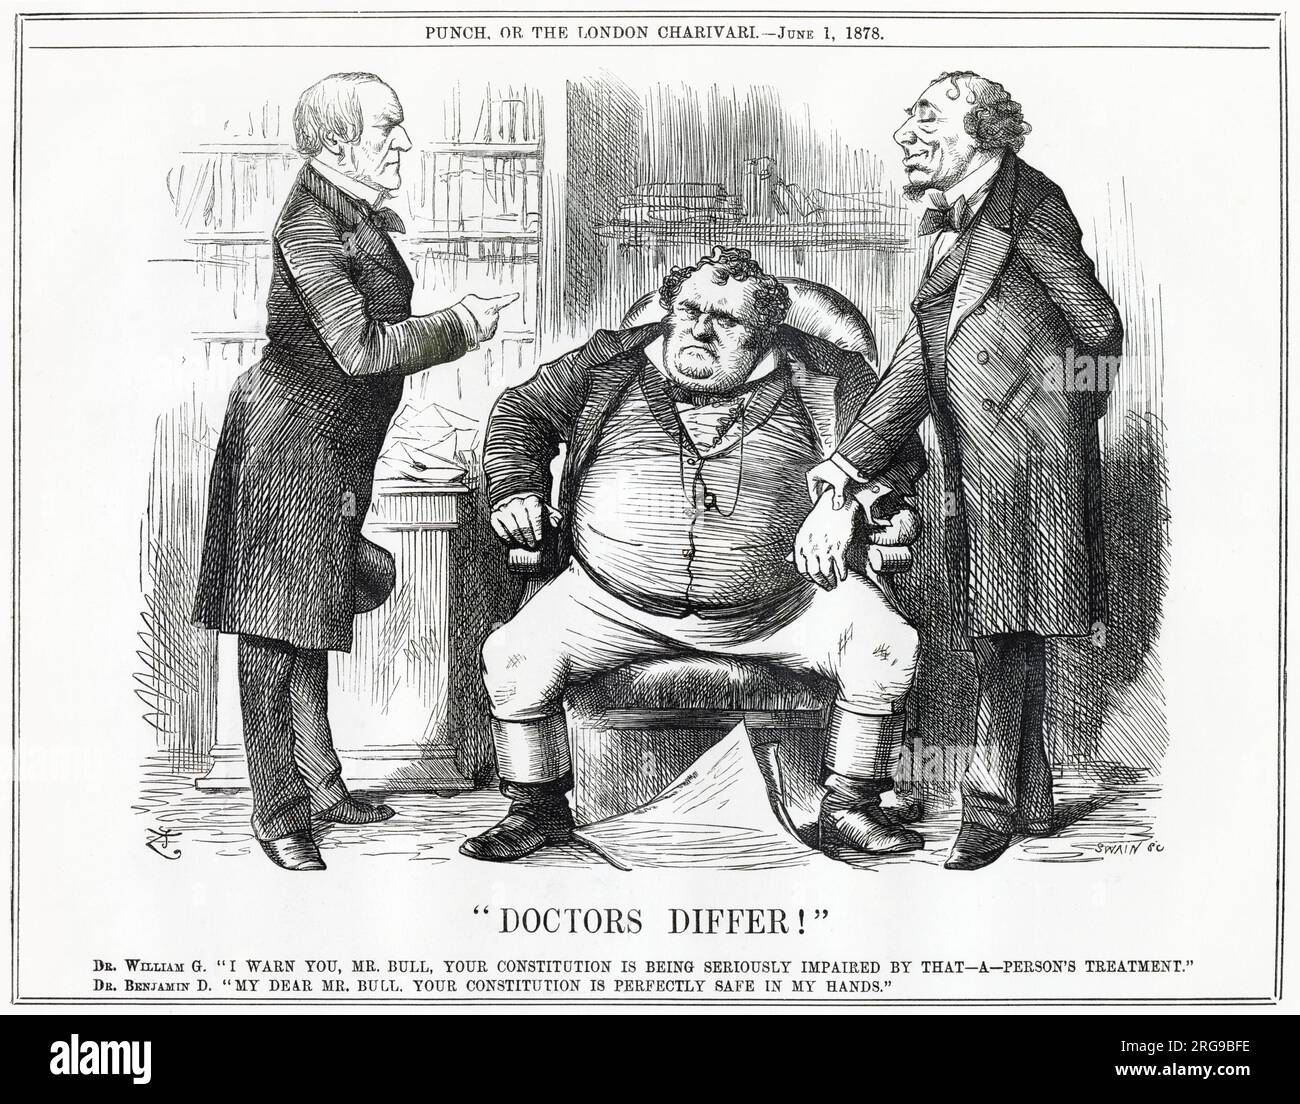 Cartoon, Doctors Differ!  Political rivals Gladstone and Disraeli have different ideas about the health of the patient (representing the country). Gladstone warns John Bull that Dr D as Prime Minister is putting his constitution in danger. Stock Photo